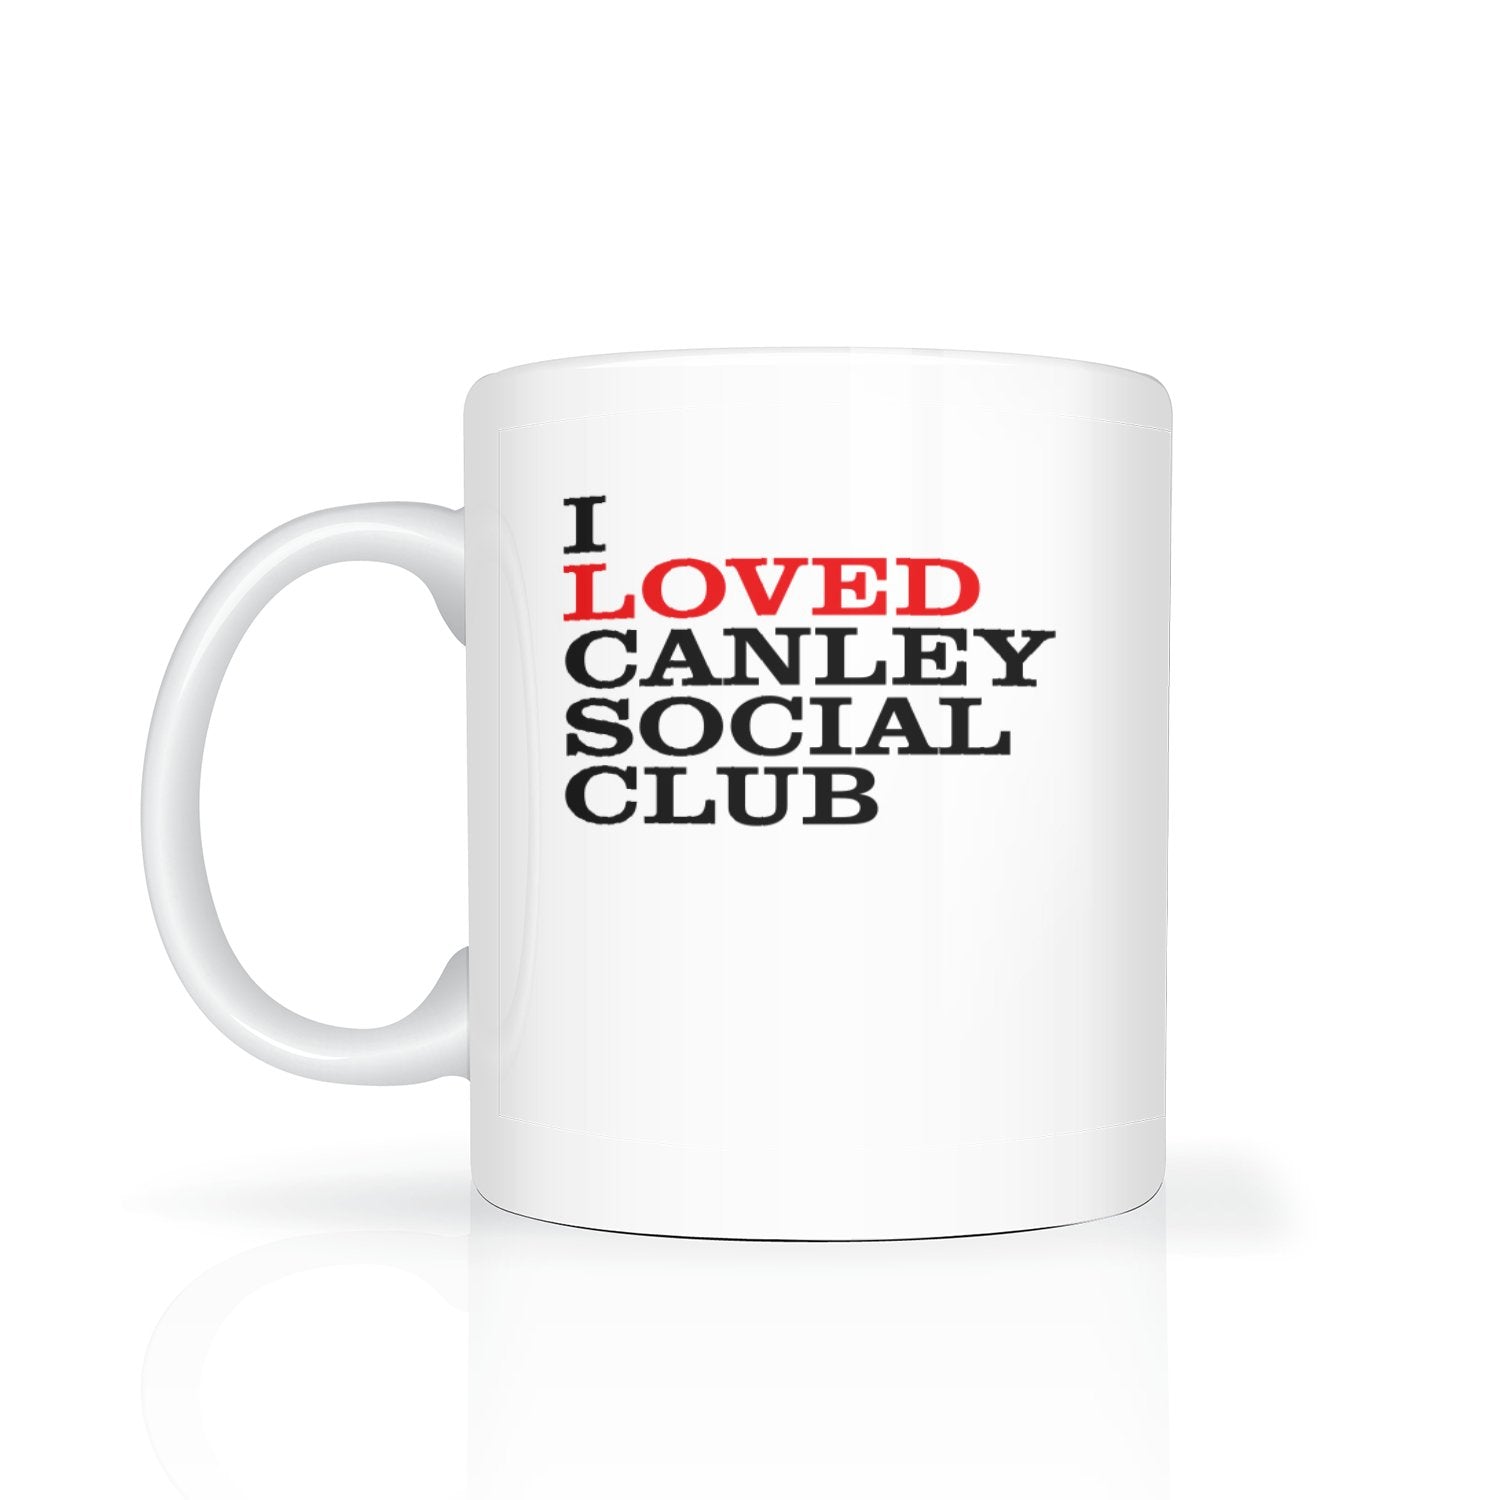 I loved Canley Social Club - mug - Dirty Stop Outs